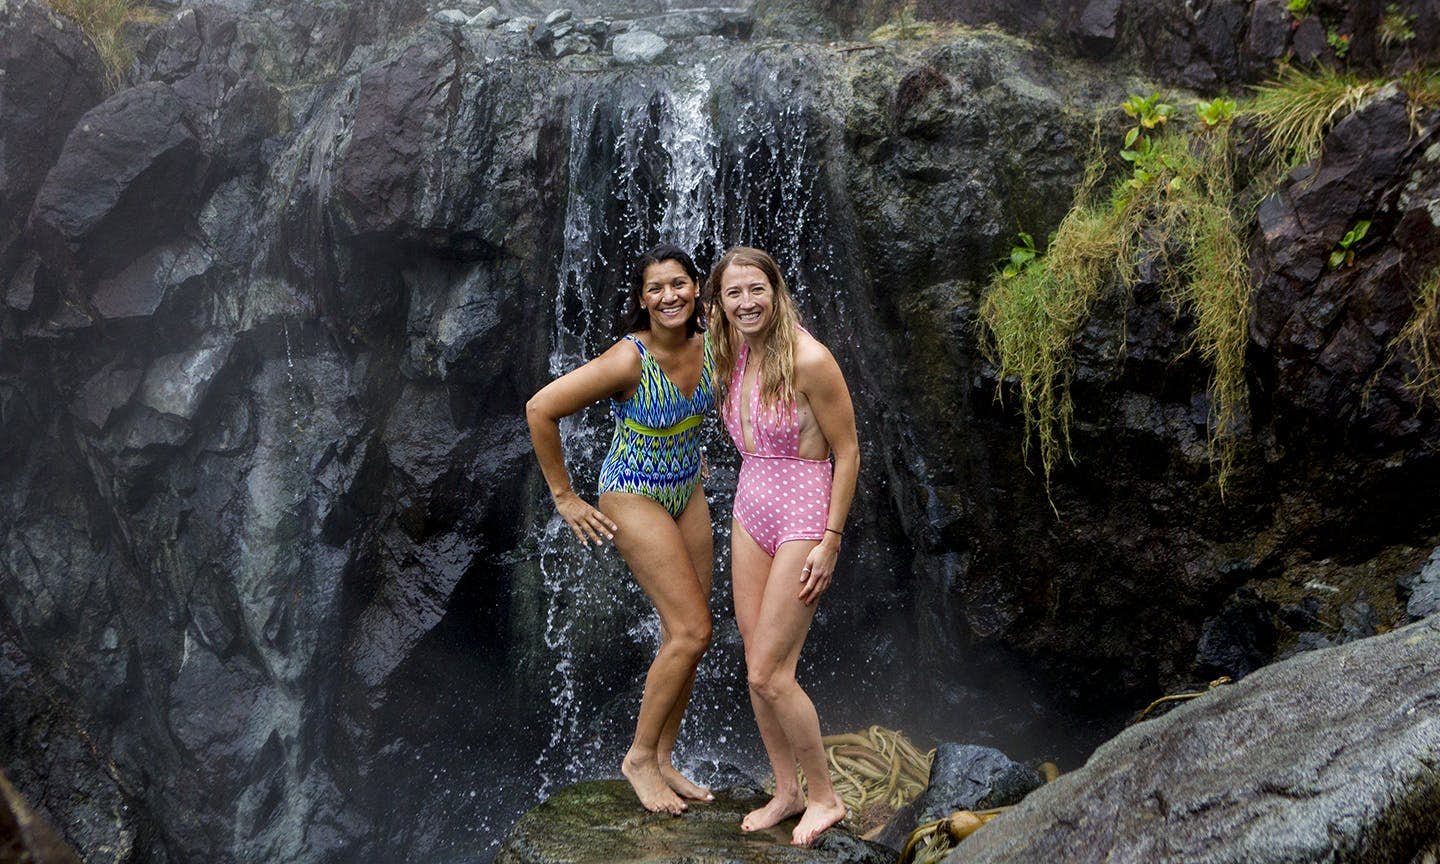 Two people standing in front of a rocky waterfall, smiling